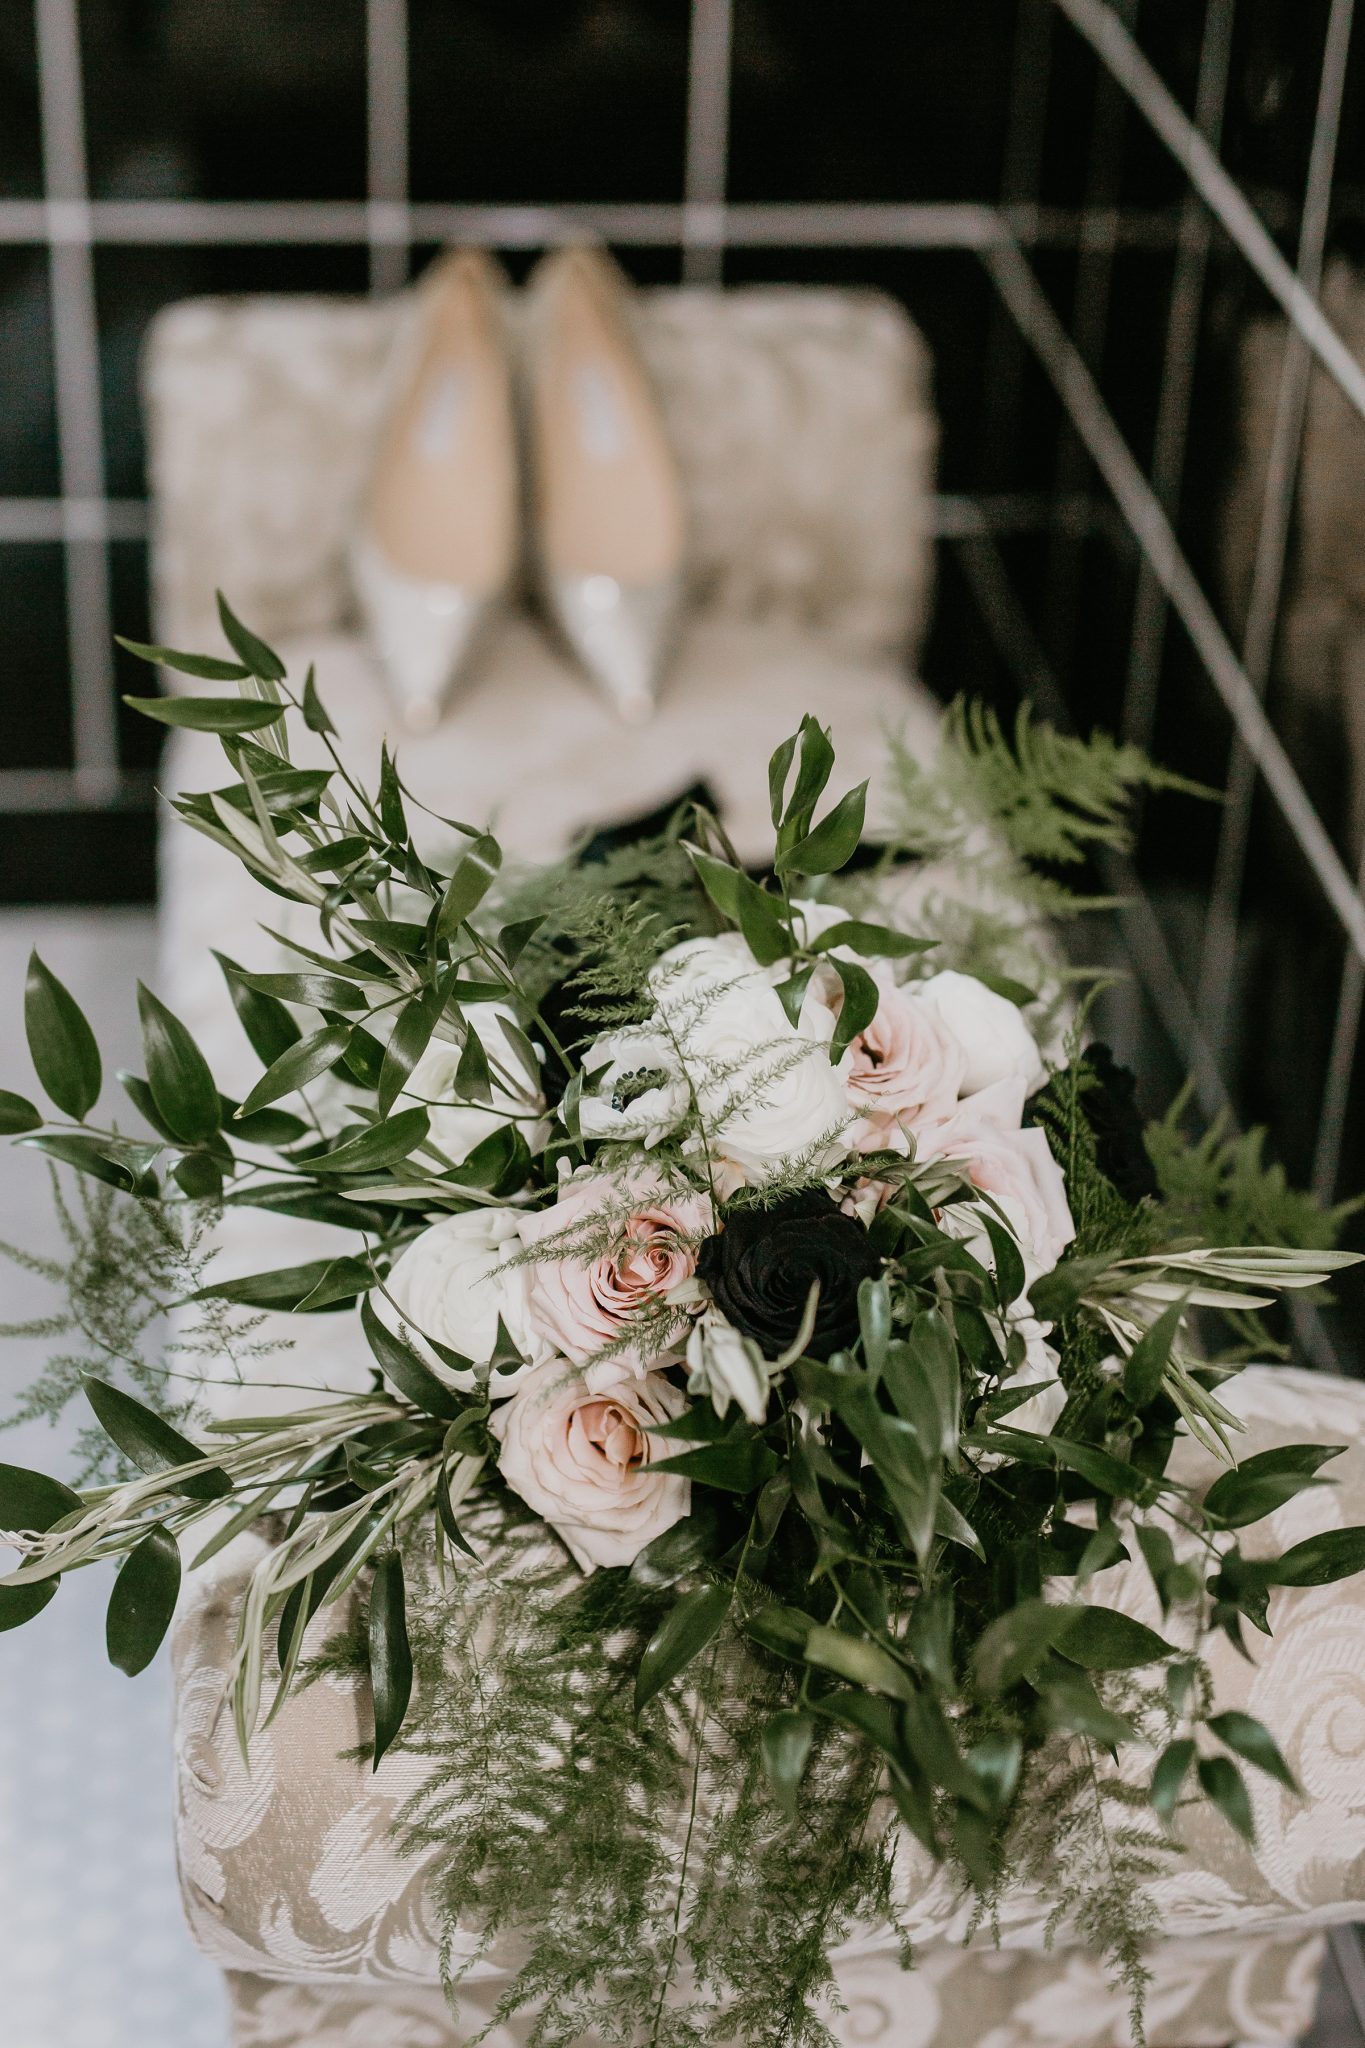 Bridal bouquet inspiration with greenery and white blooms